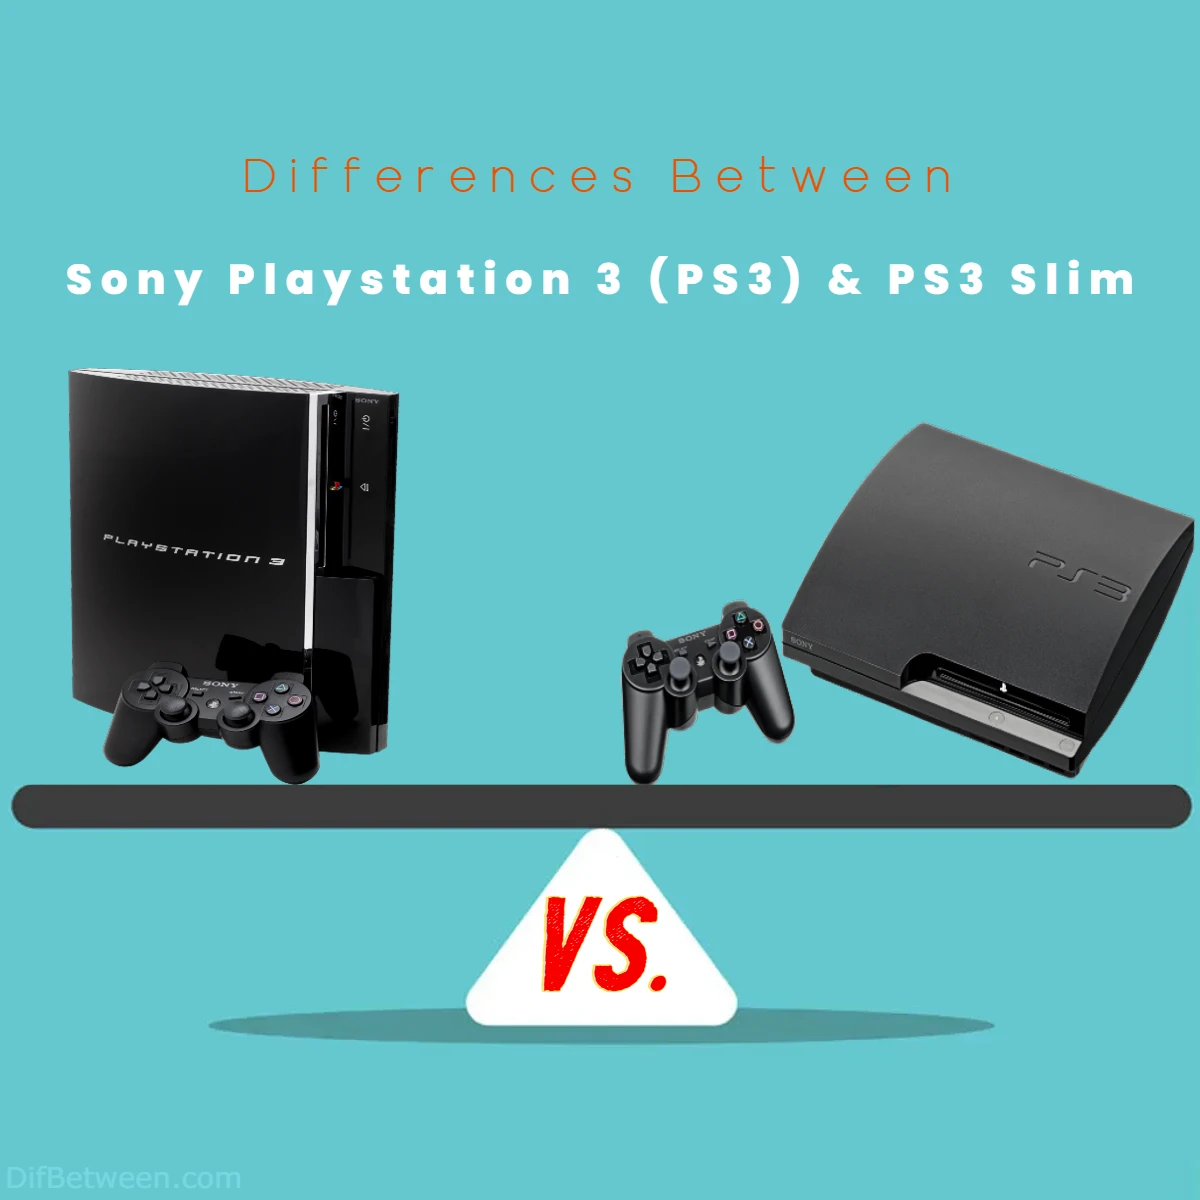 Differences Between Sony Playstation 3 (PS3) vs PS3 Slim